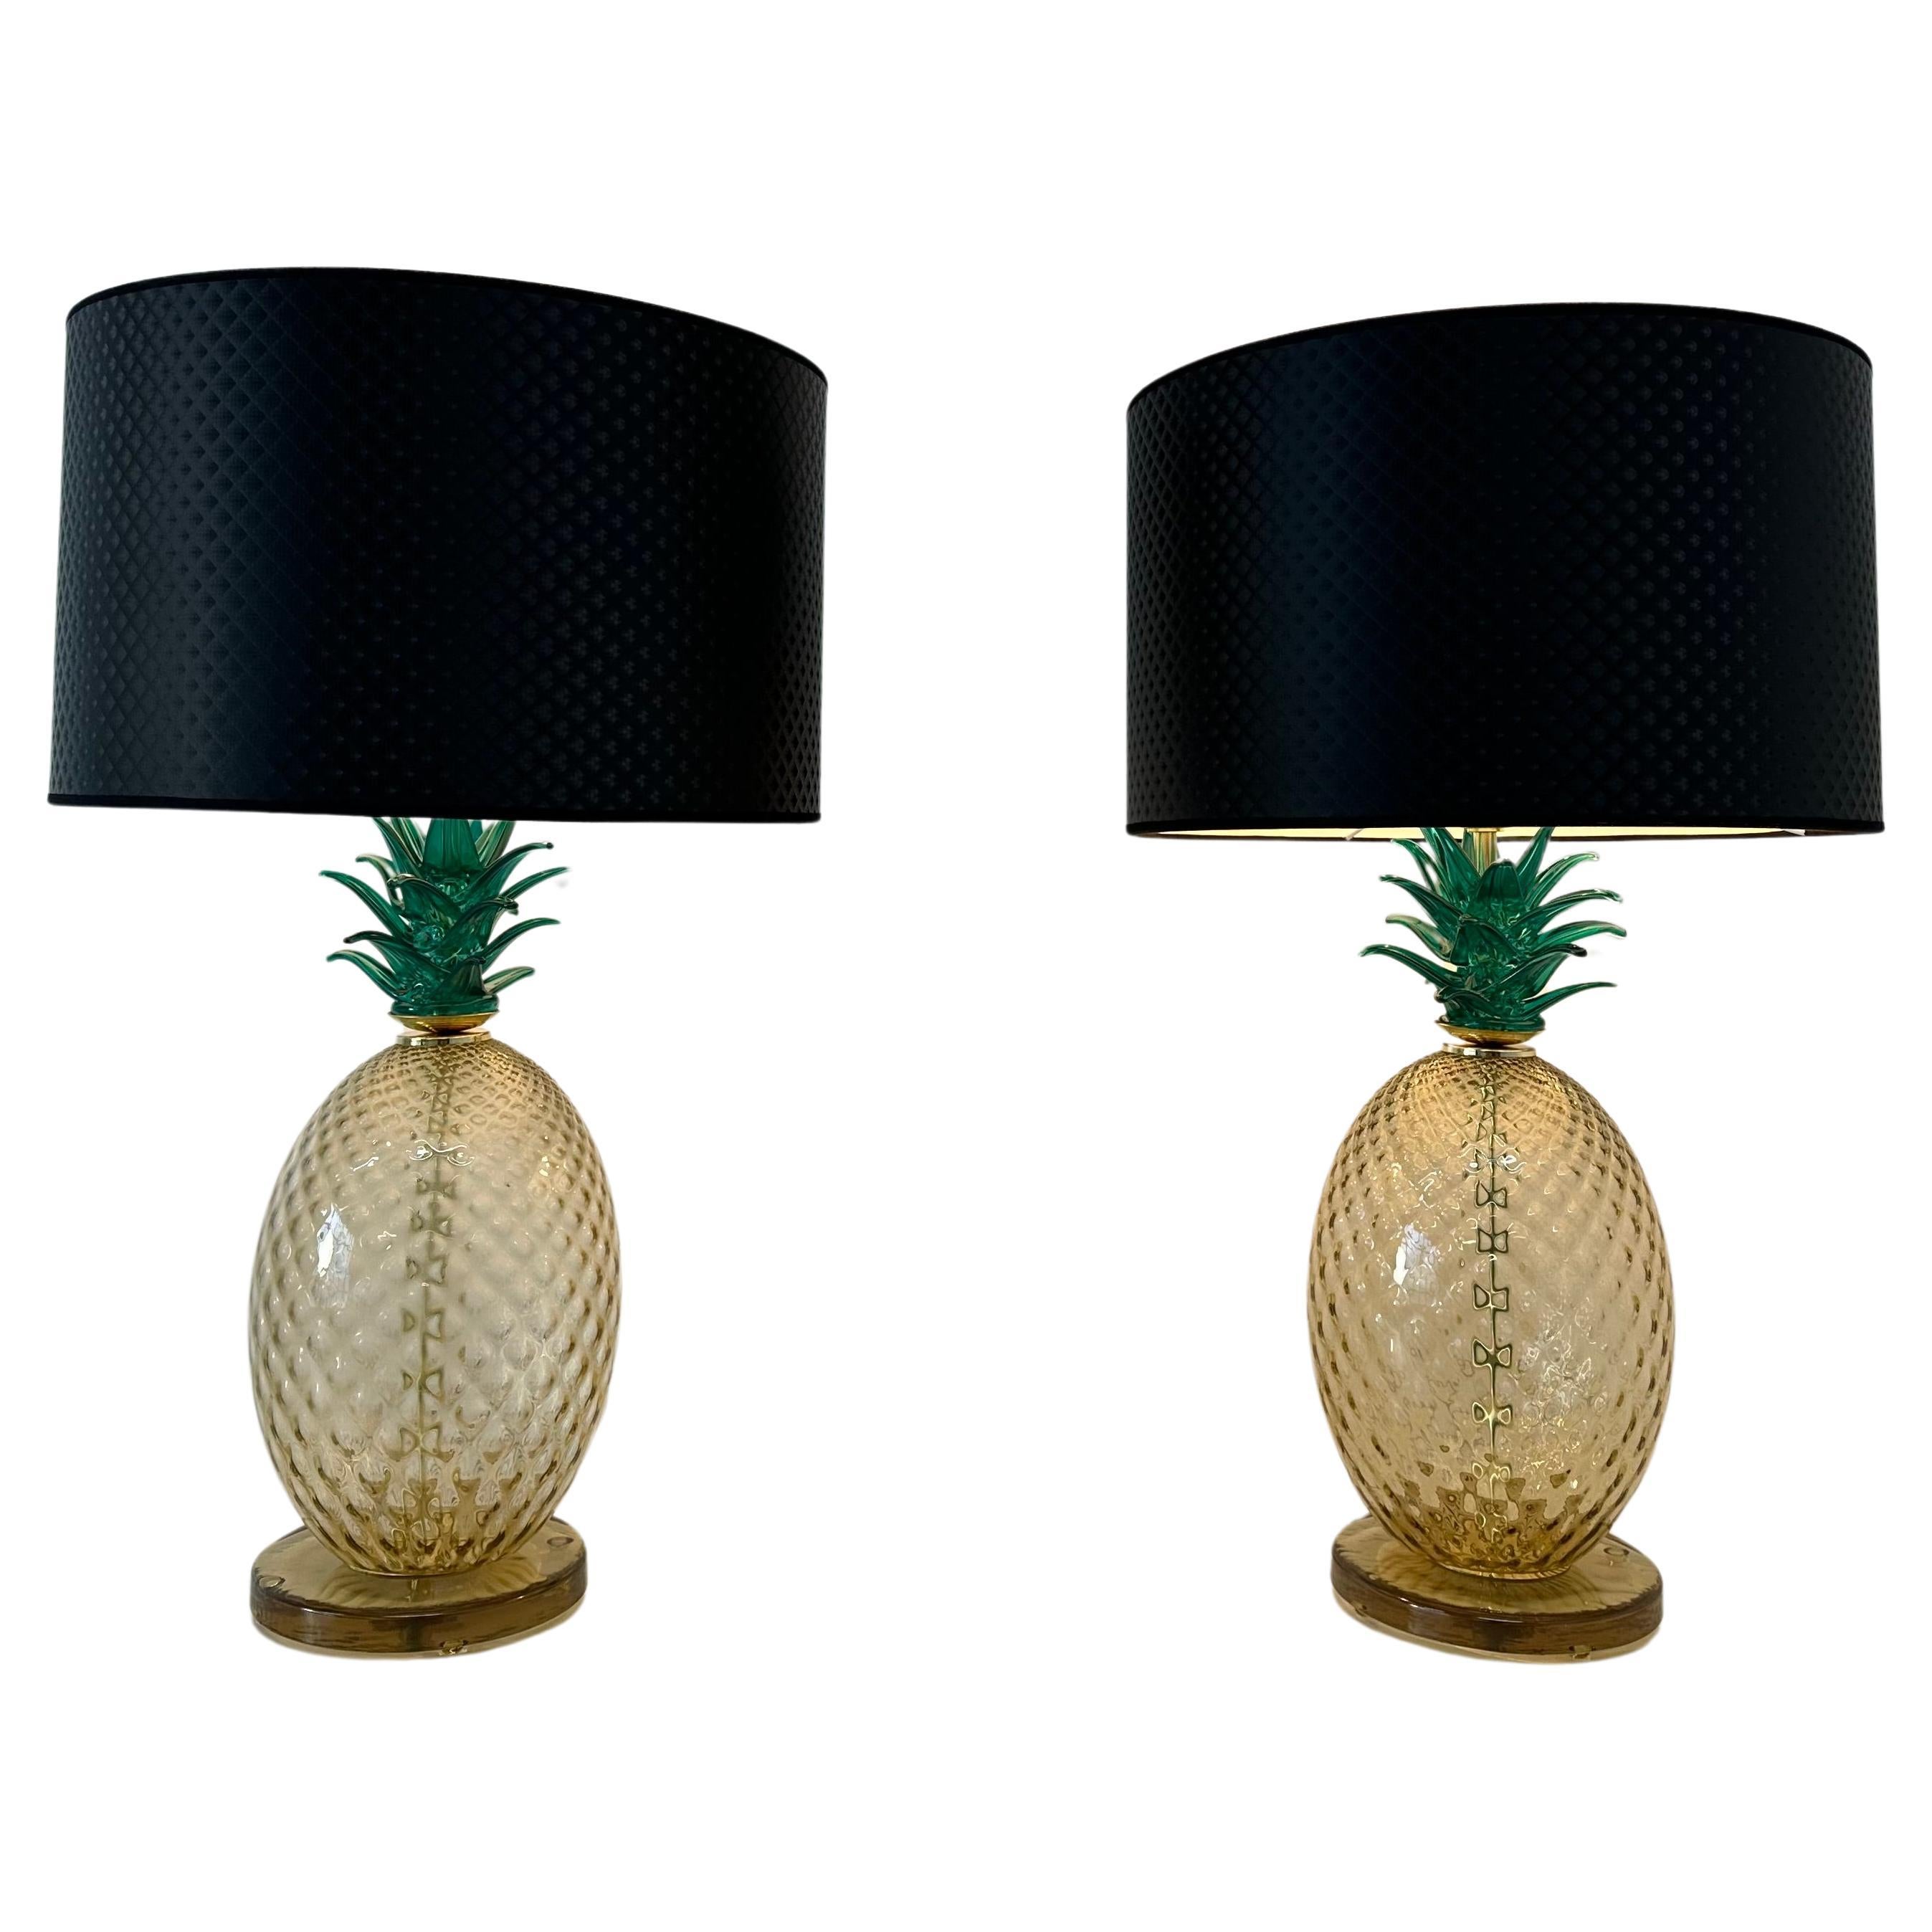 Pair of Italian Art Deco Pineapple Murano Glass Lamps with Lampshades  For Sale